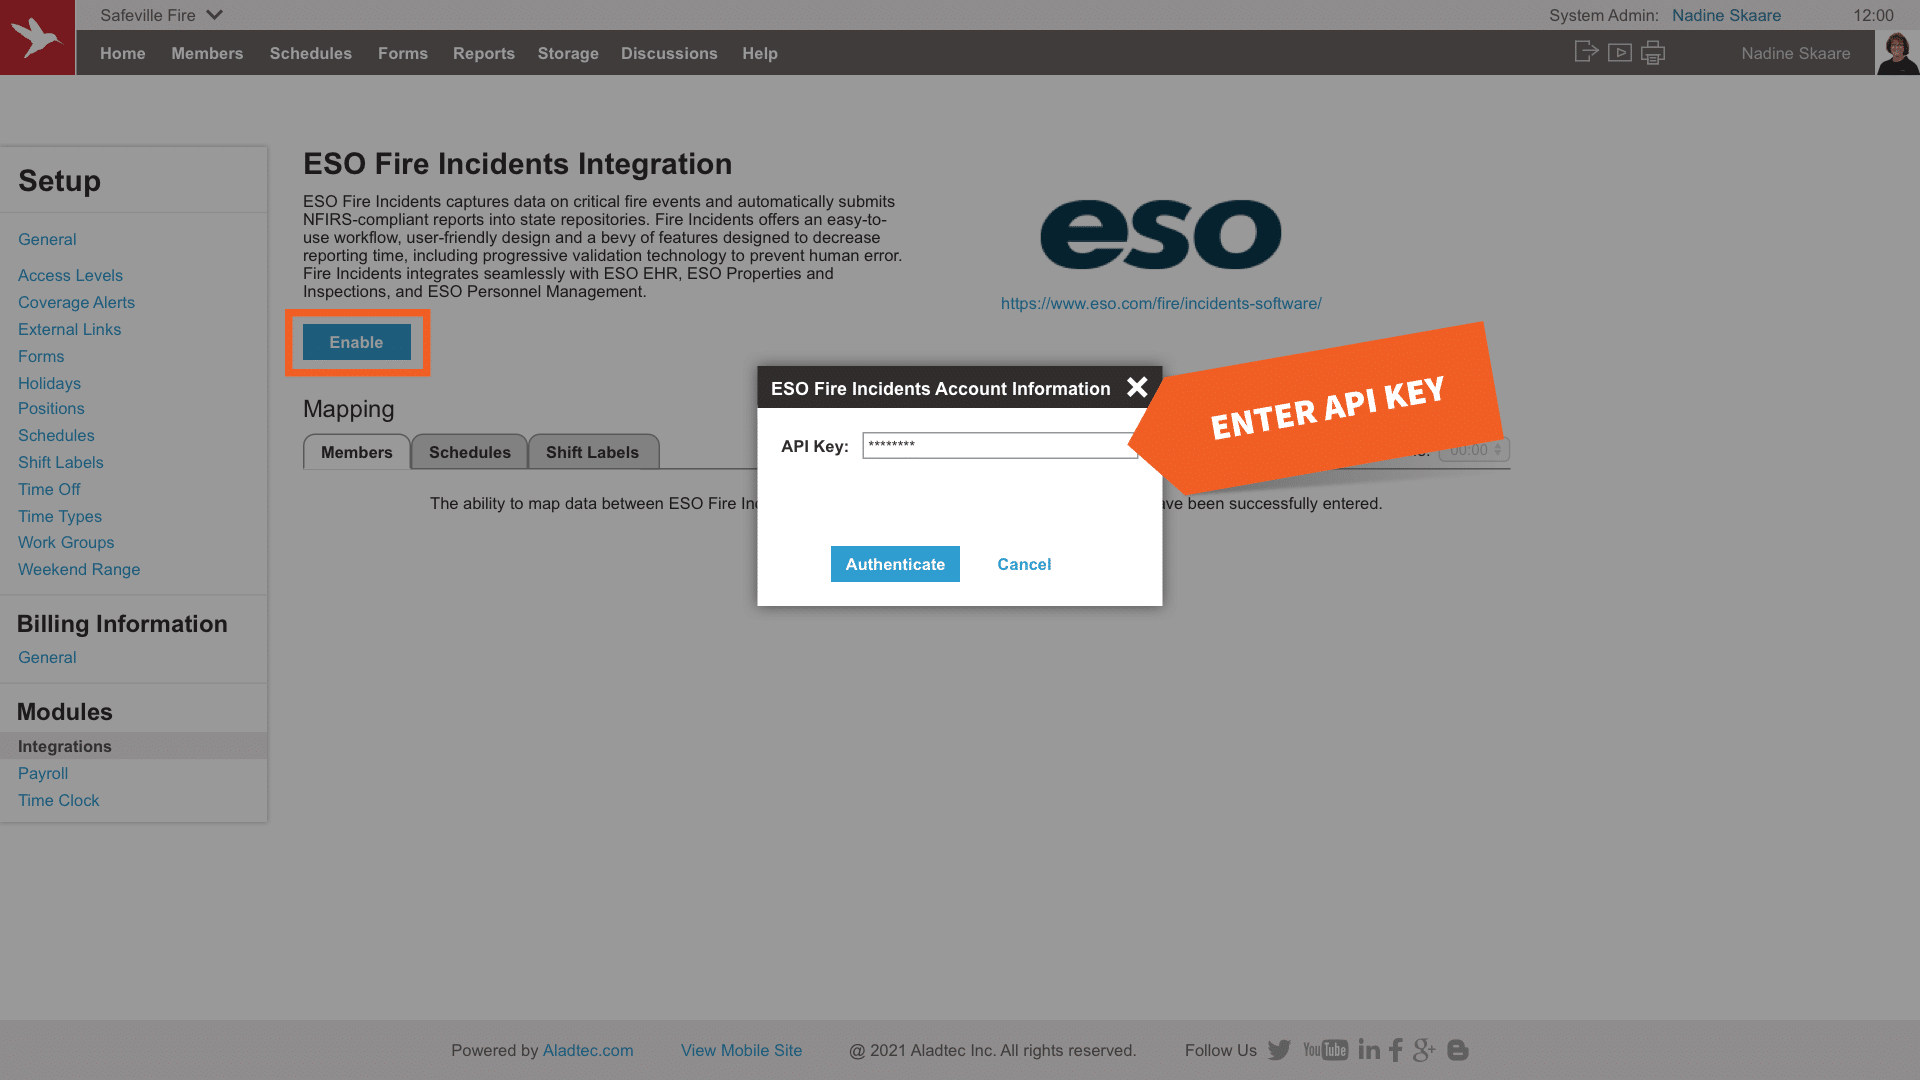 Enter the API Key from ESO to authenticate the integration, as seen below